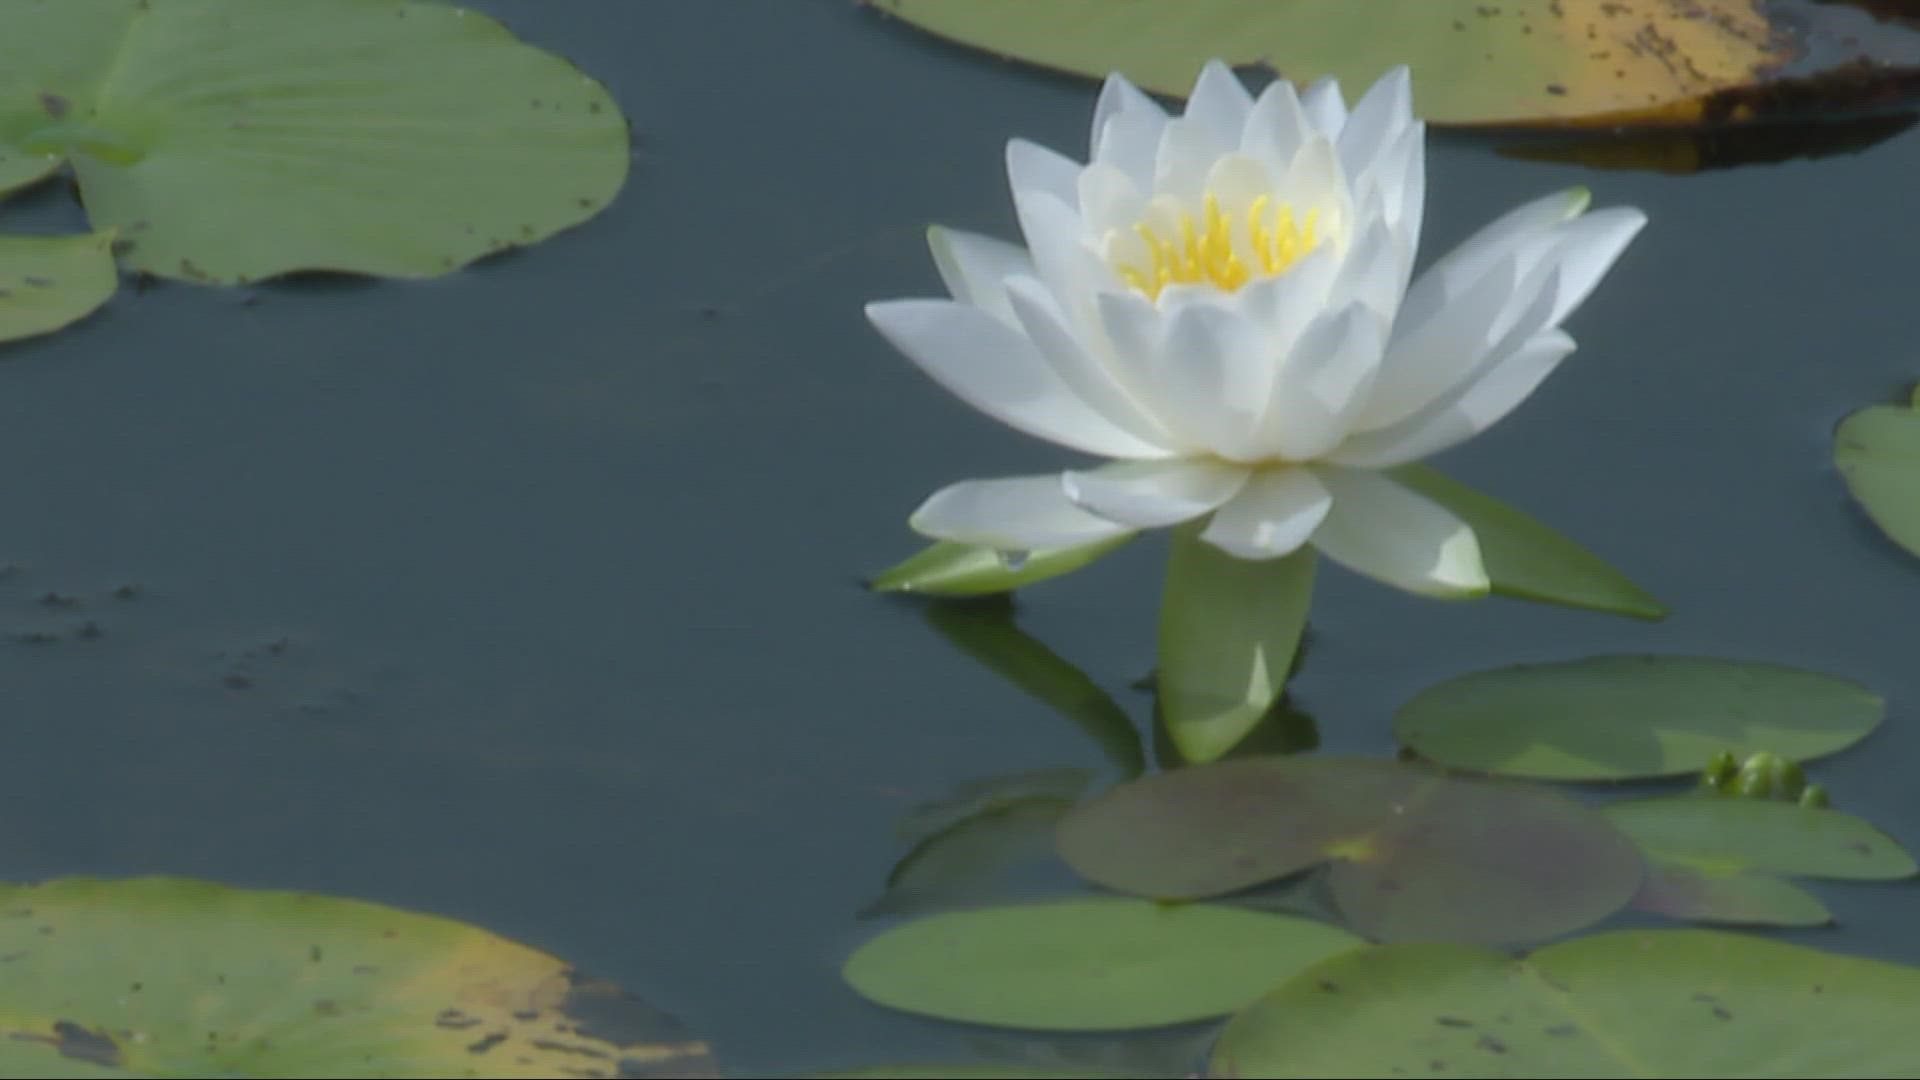 Here's what you can expect this summer at the Holden Arboretum in Kirtland.